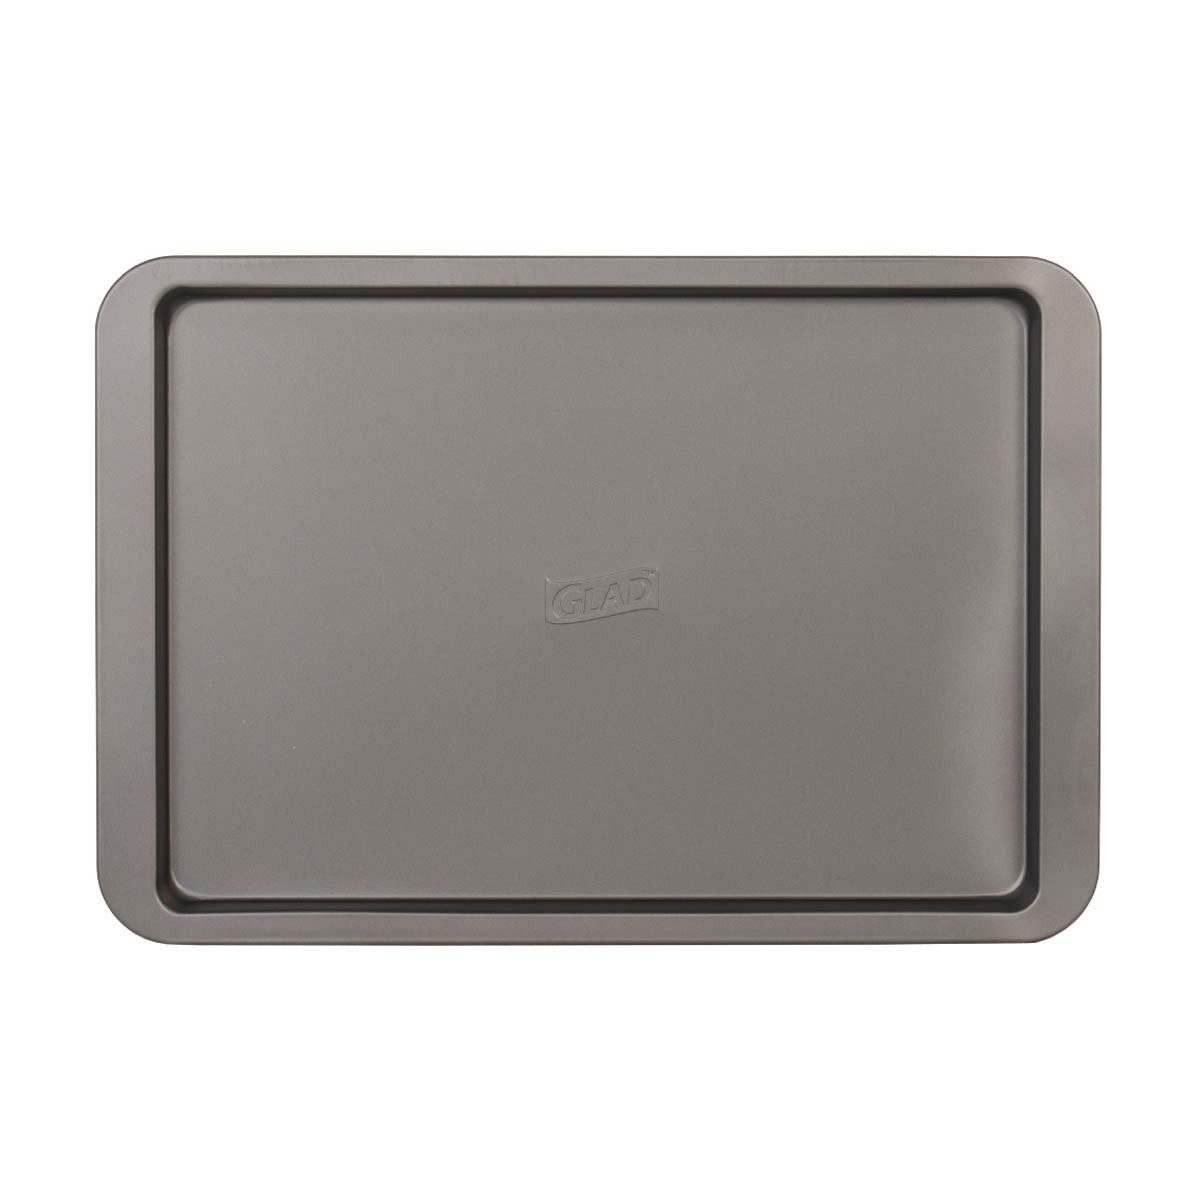 Glad Large Cookie Sheet 17.25 in x 11.75 in